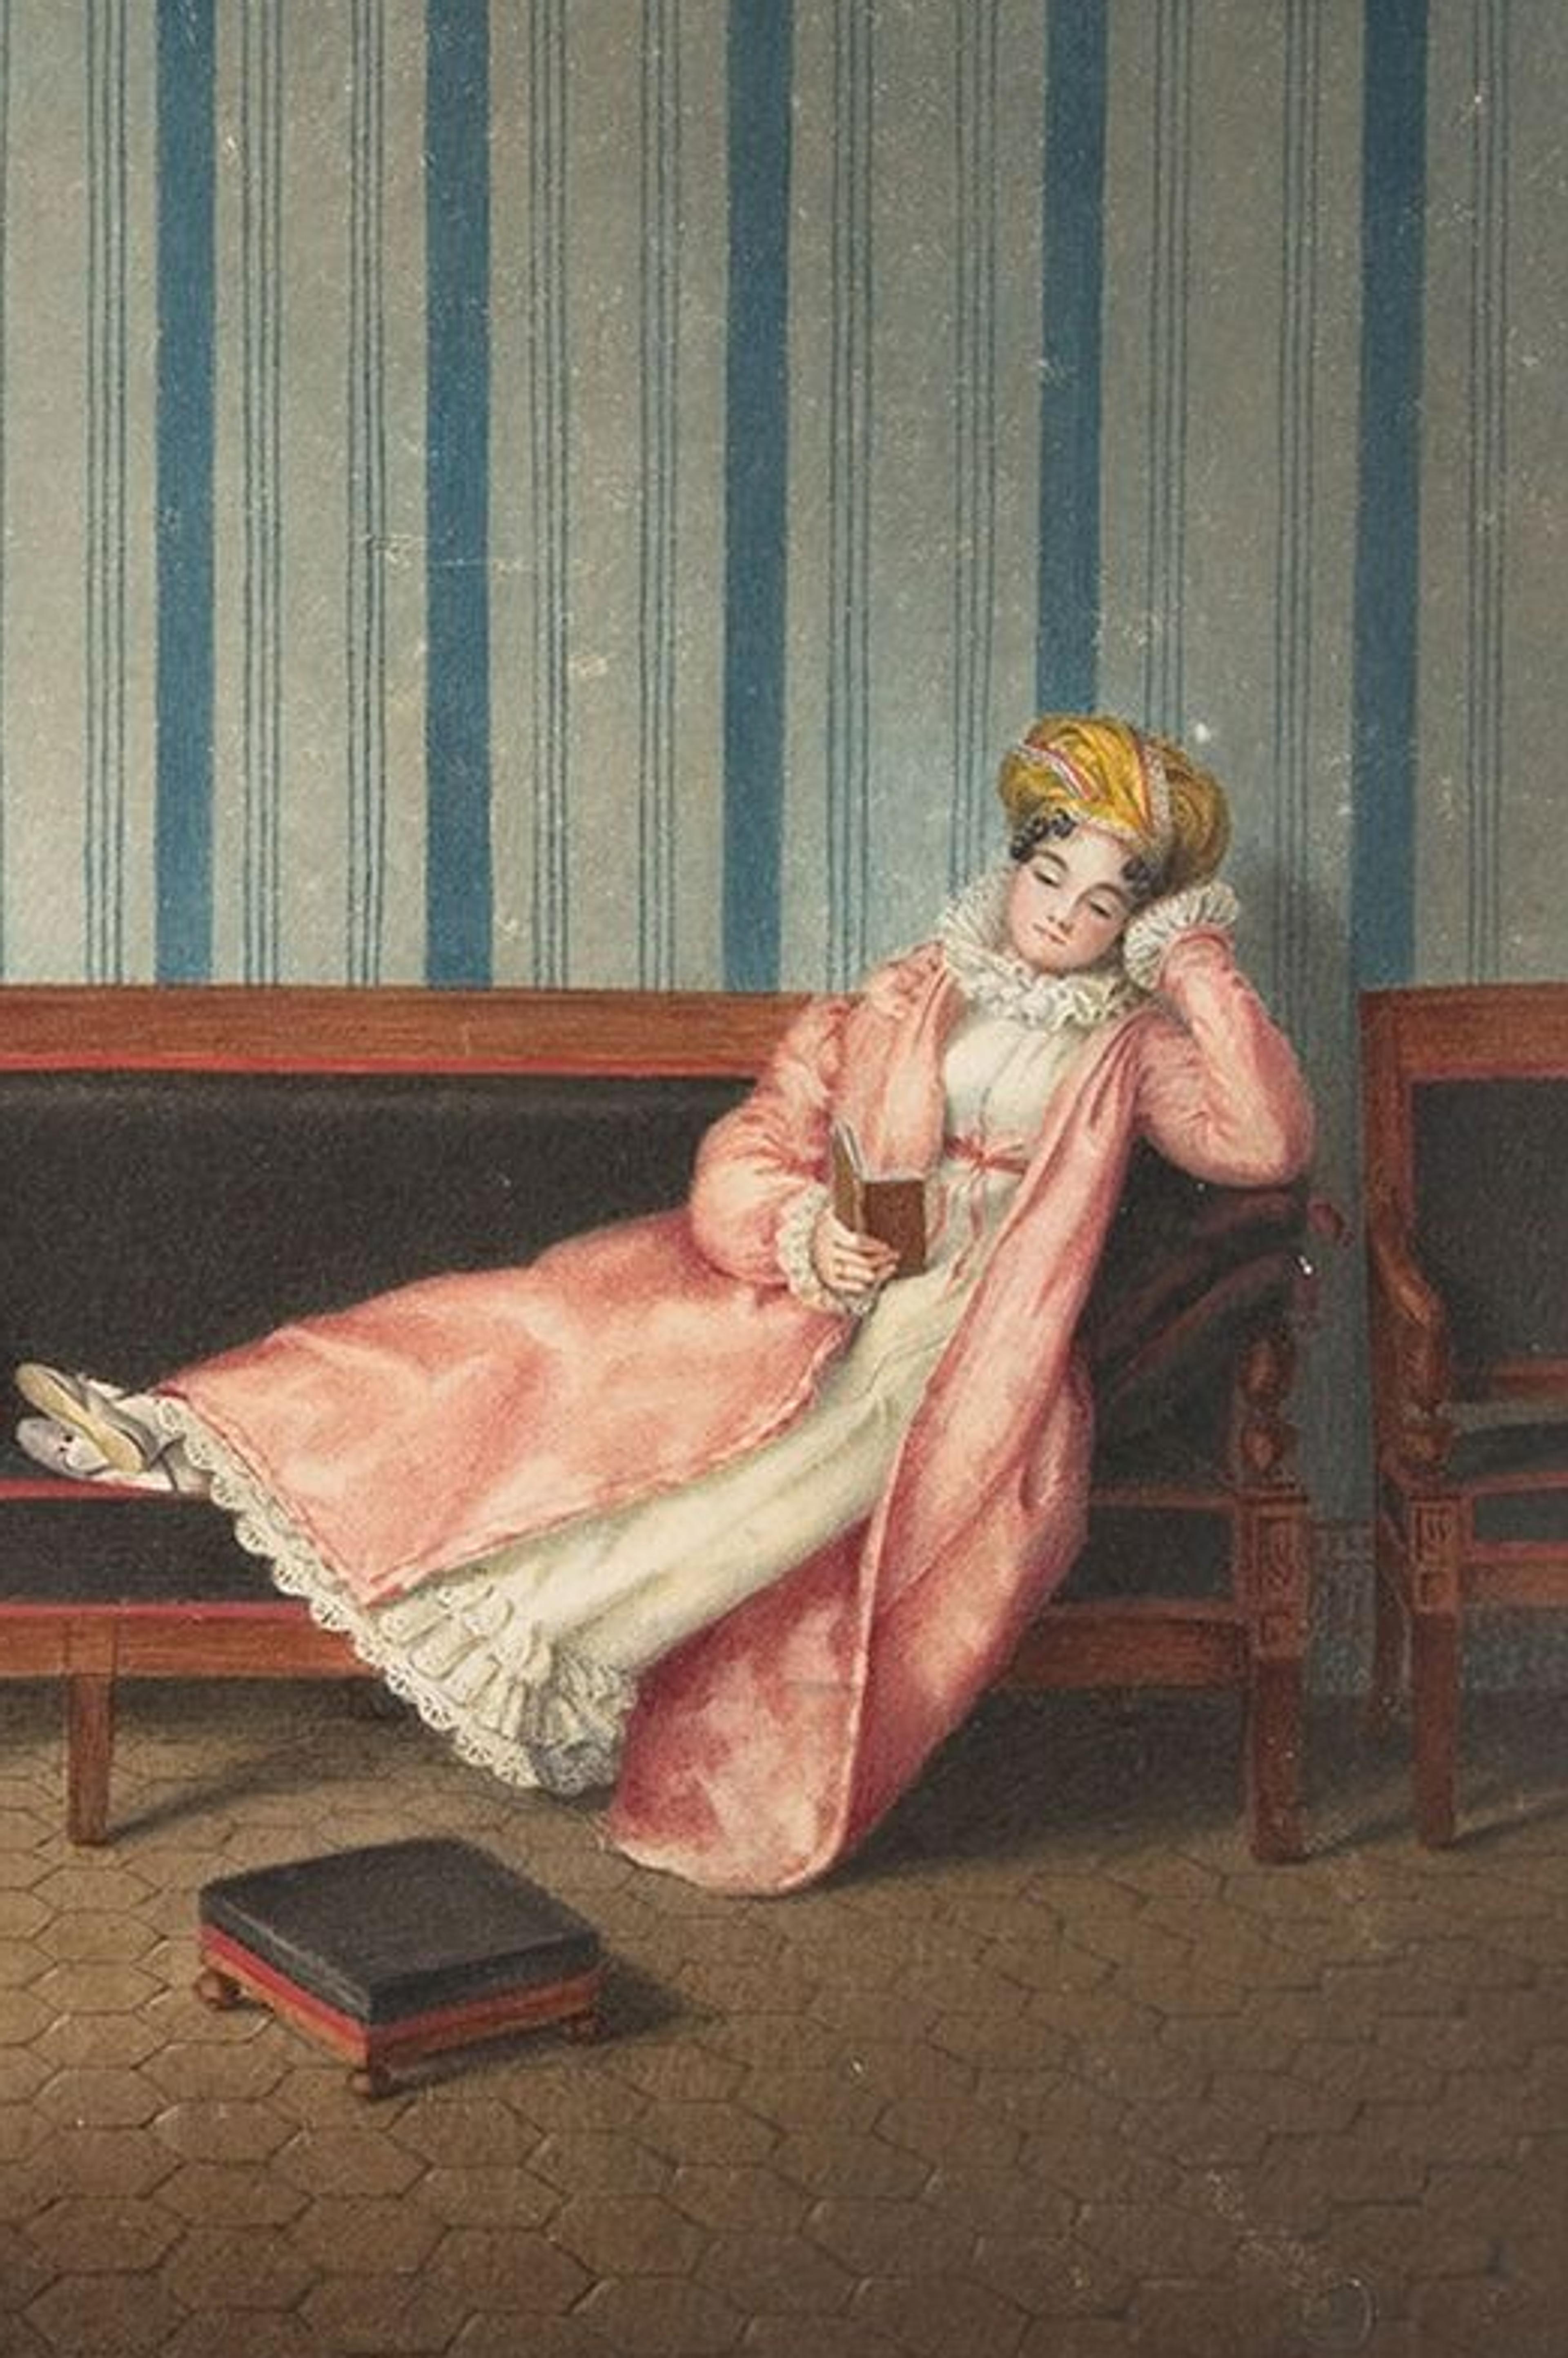 A print of a woman in a pink coat and white dress lounging and reading leisurely in a sitting room.